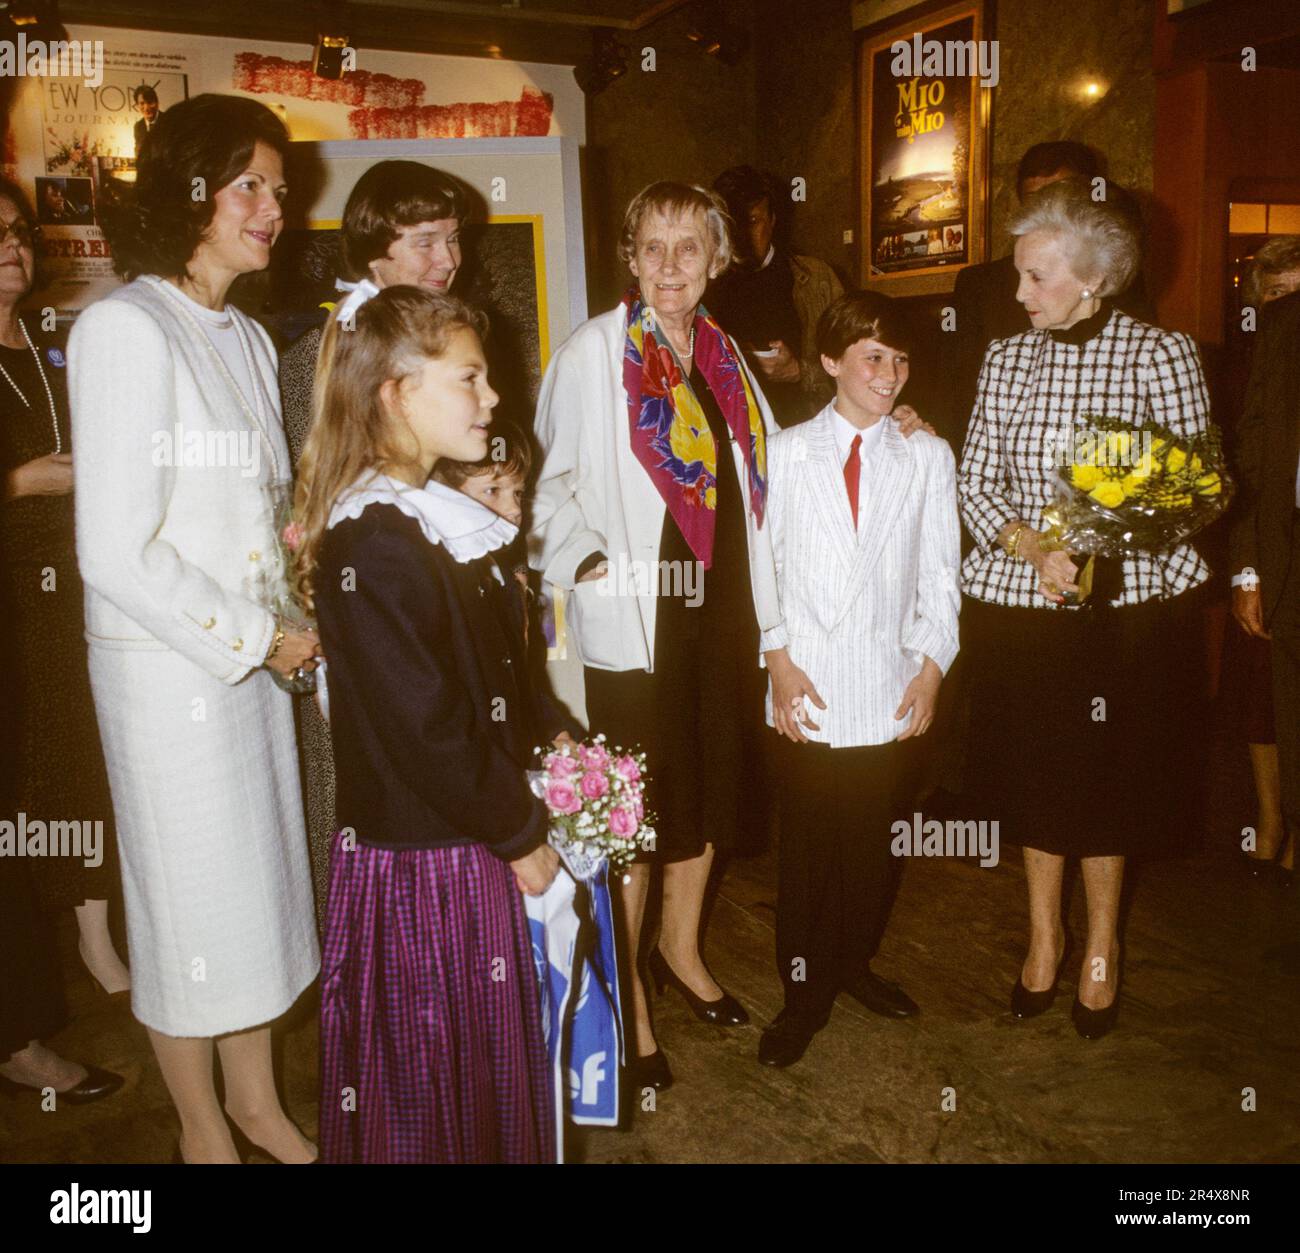 QUEEN SILVIA with princess Victoria and prince Carl Philip meets Astrid Lindgren and Lisbet Palme and Princess Lilian after a Children´s theater performance at Royal Dramatic Theater Stock Photo